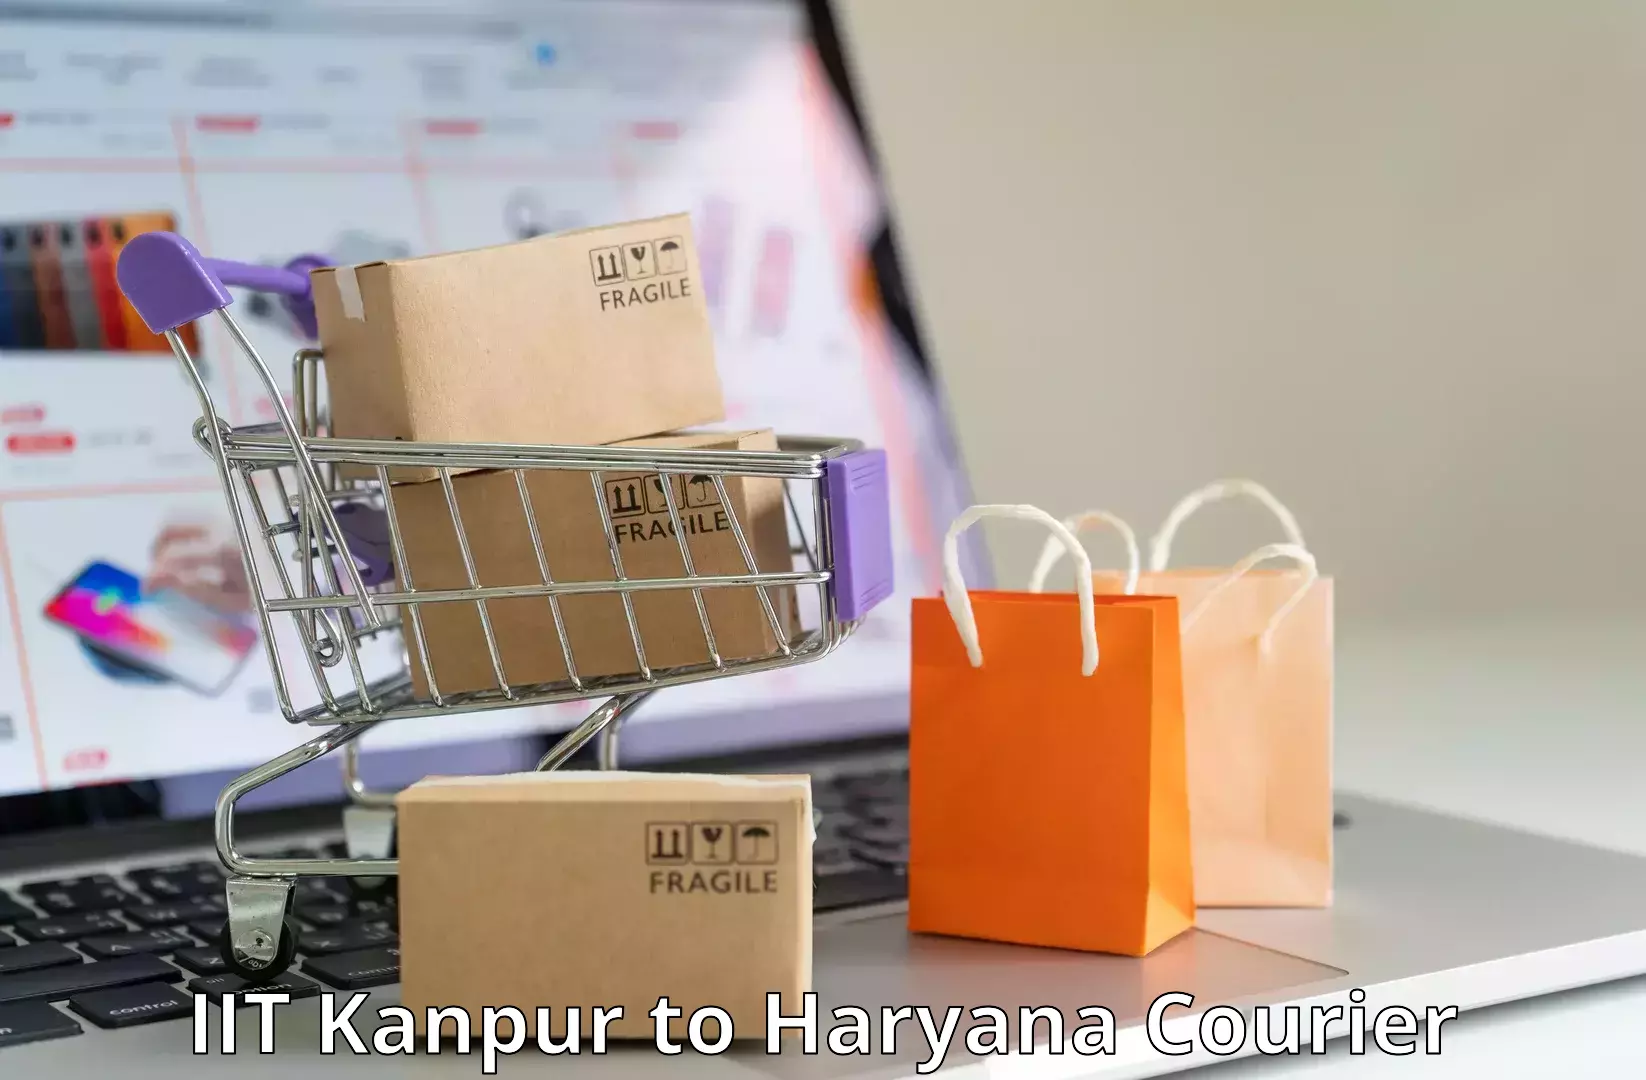 Courier service comparison IIT Kanpur to Karnal